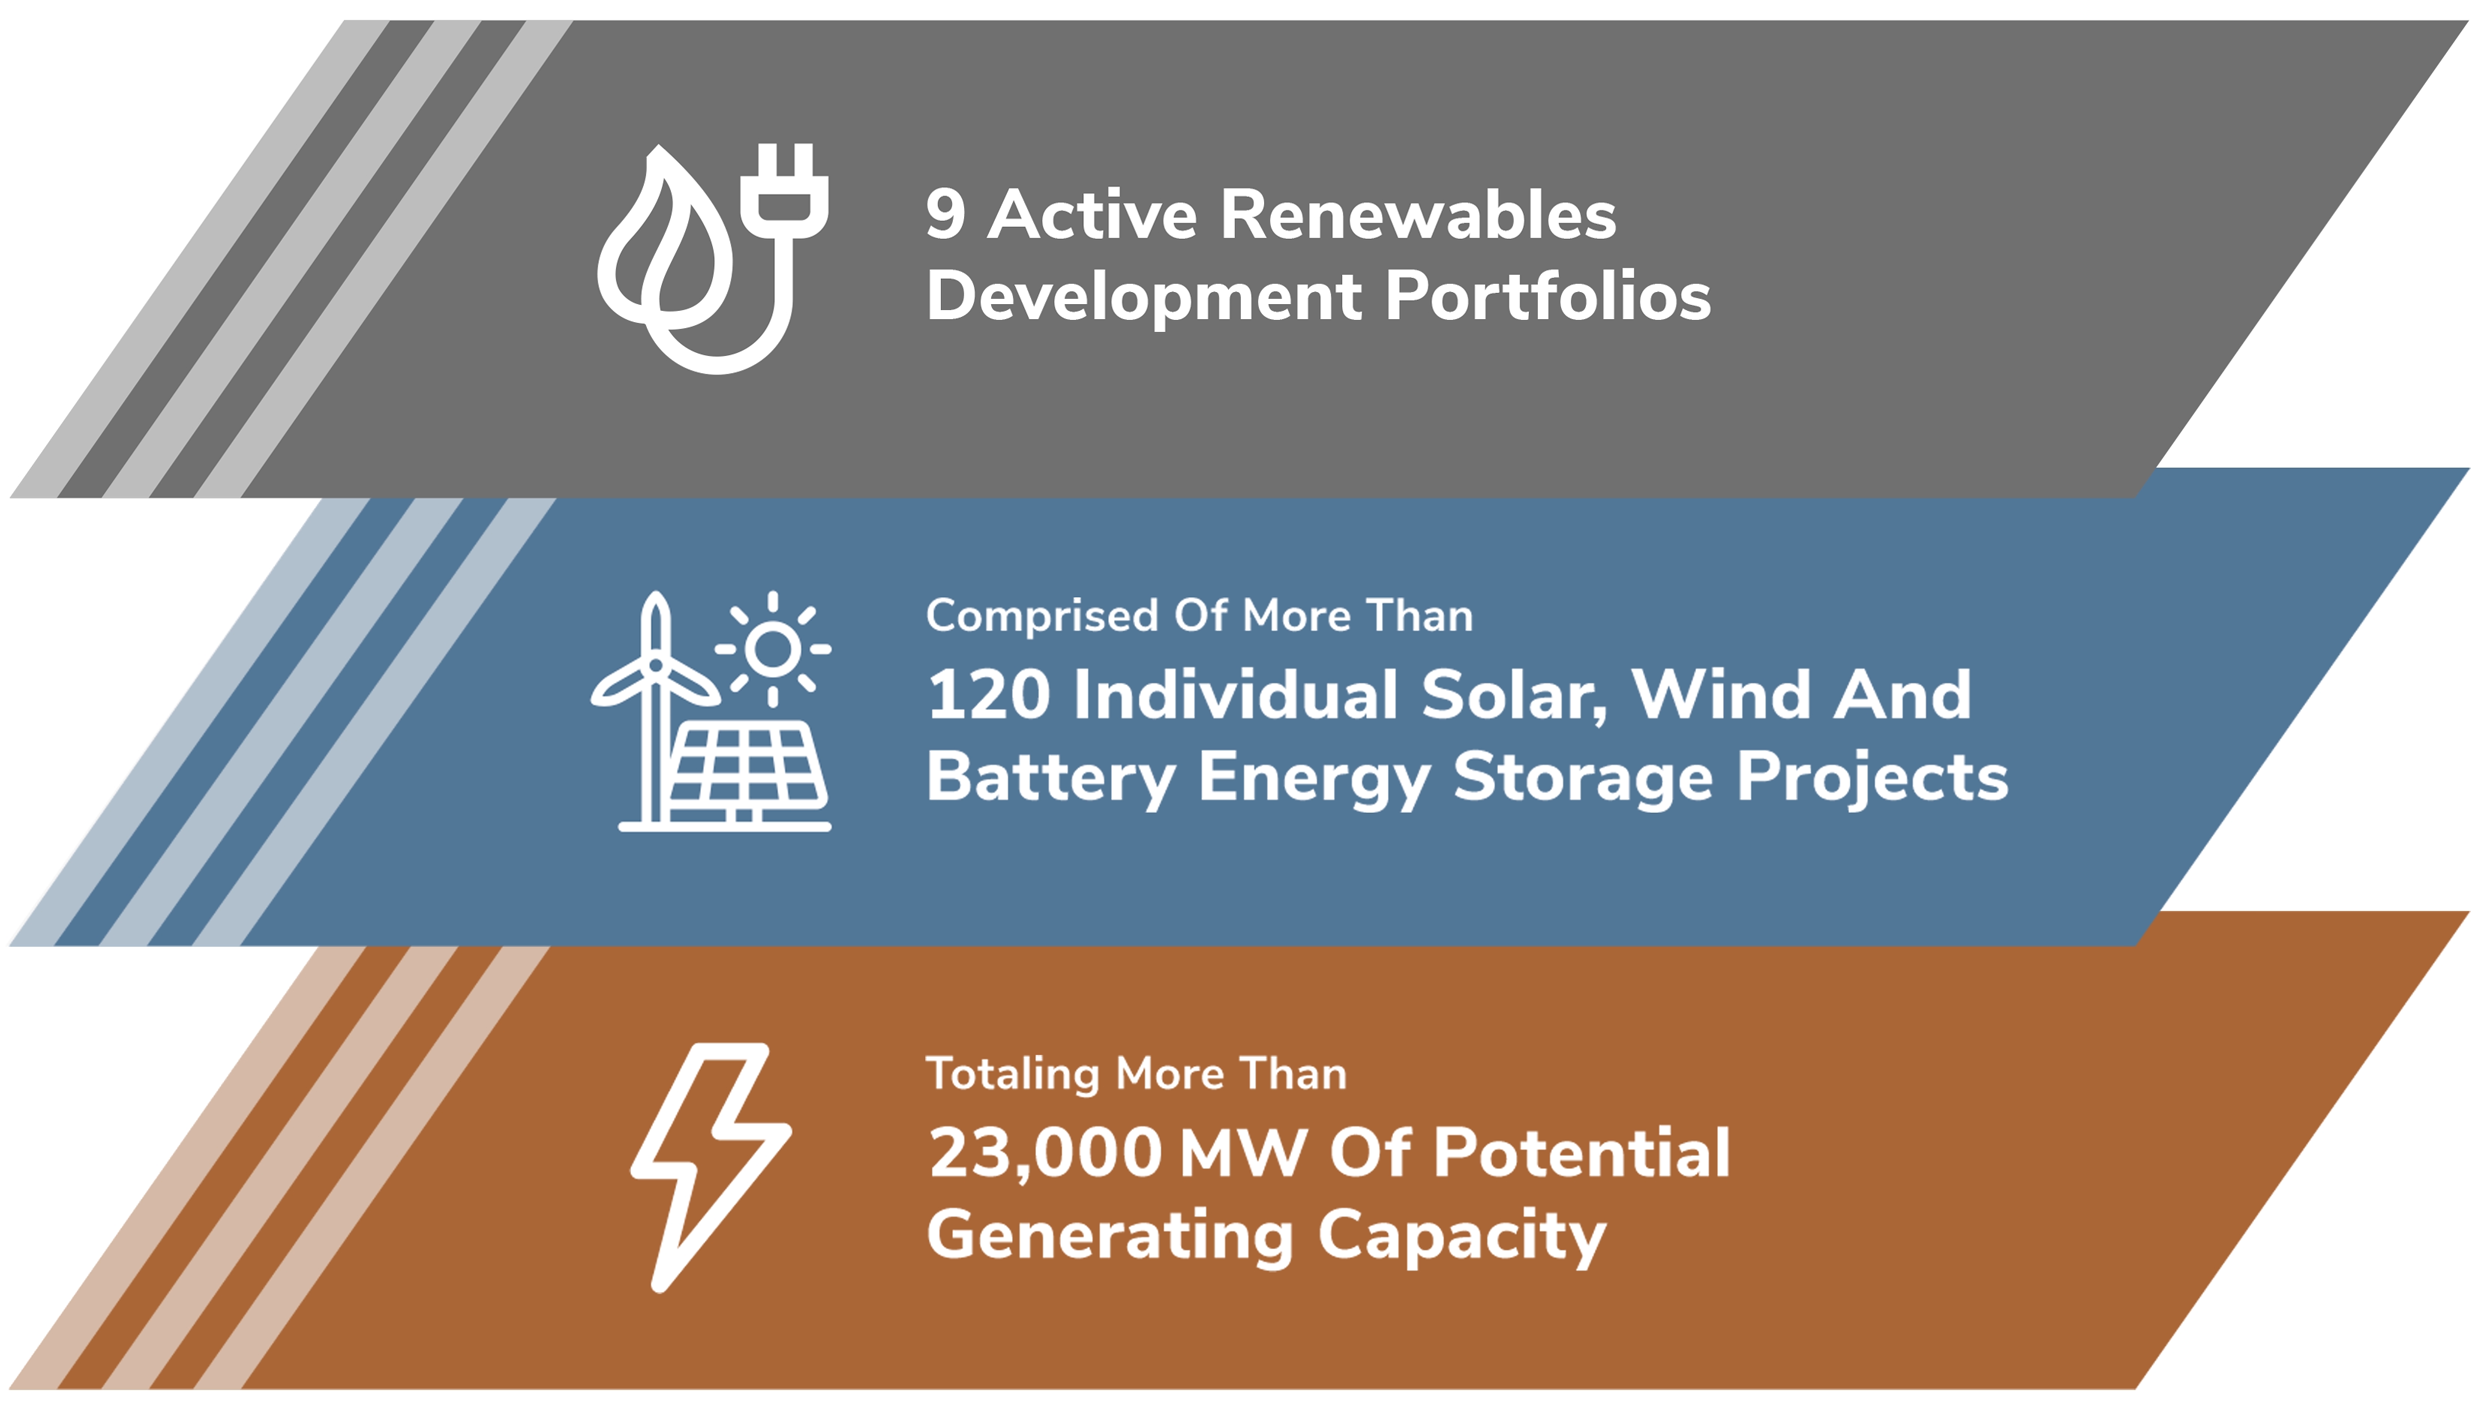 Tenaska’s Engineering and Operations Group has nine active renewables development portfolios, comprised of more than 120 solar, wind and battery energy storage projects, totaling more than 23,000 MW of potential generating capacity.